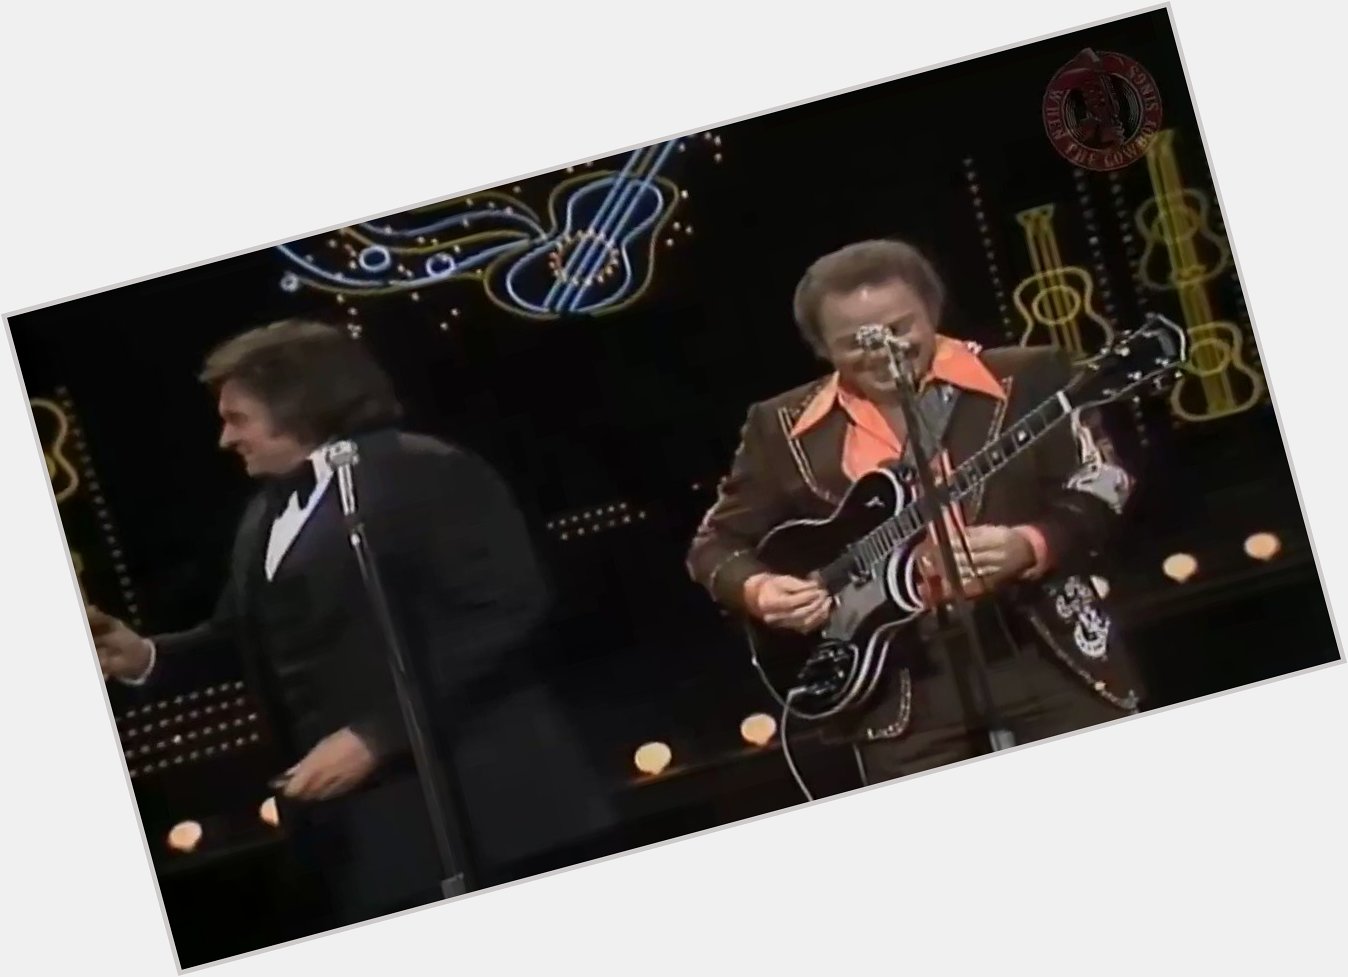 Happy Bday Roy Clark    Here with Johnny Cash
Orange Blossom Special 1978 